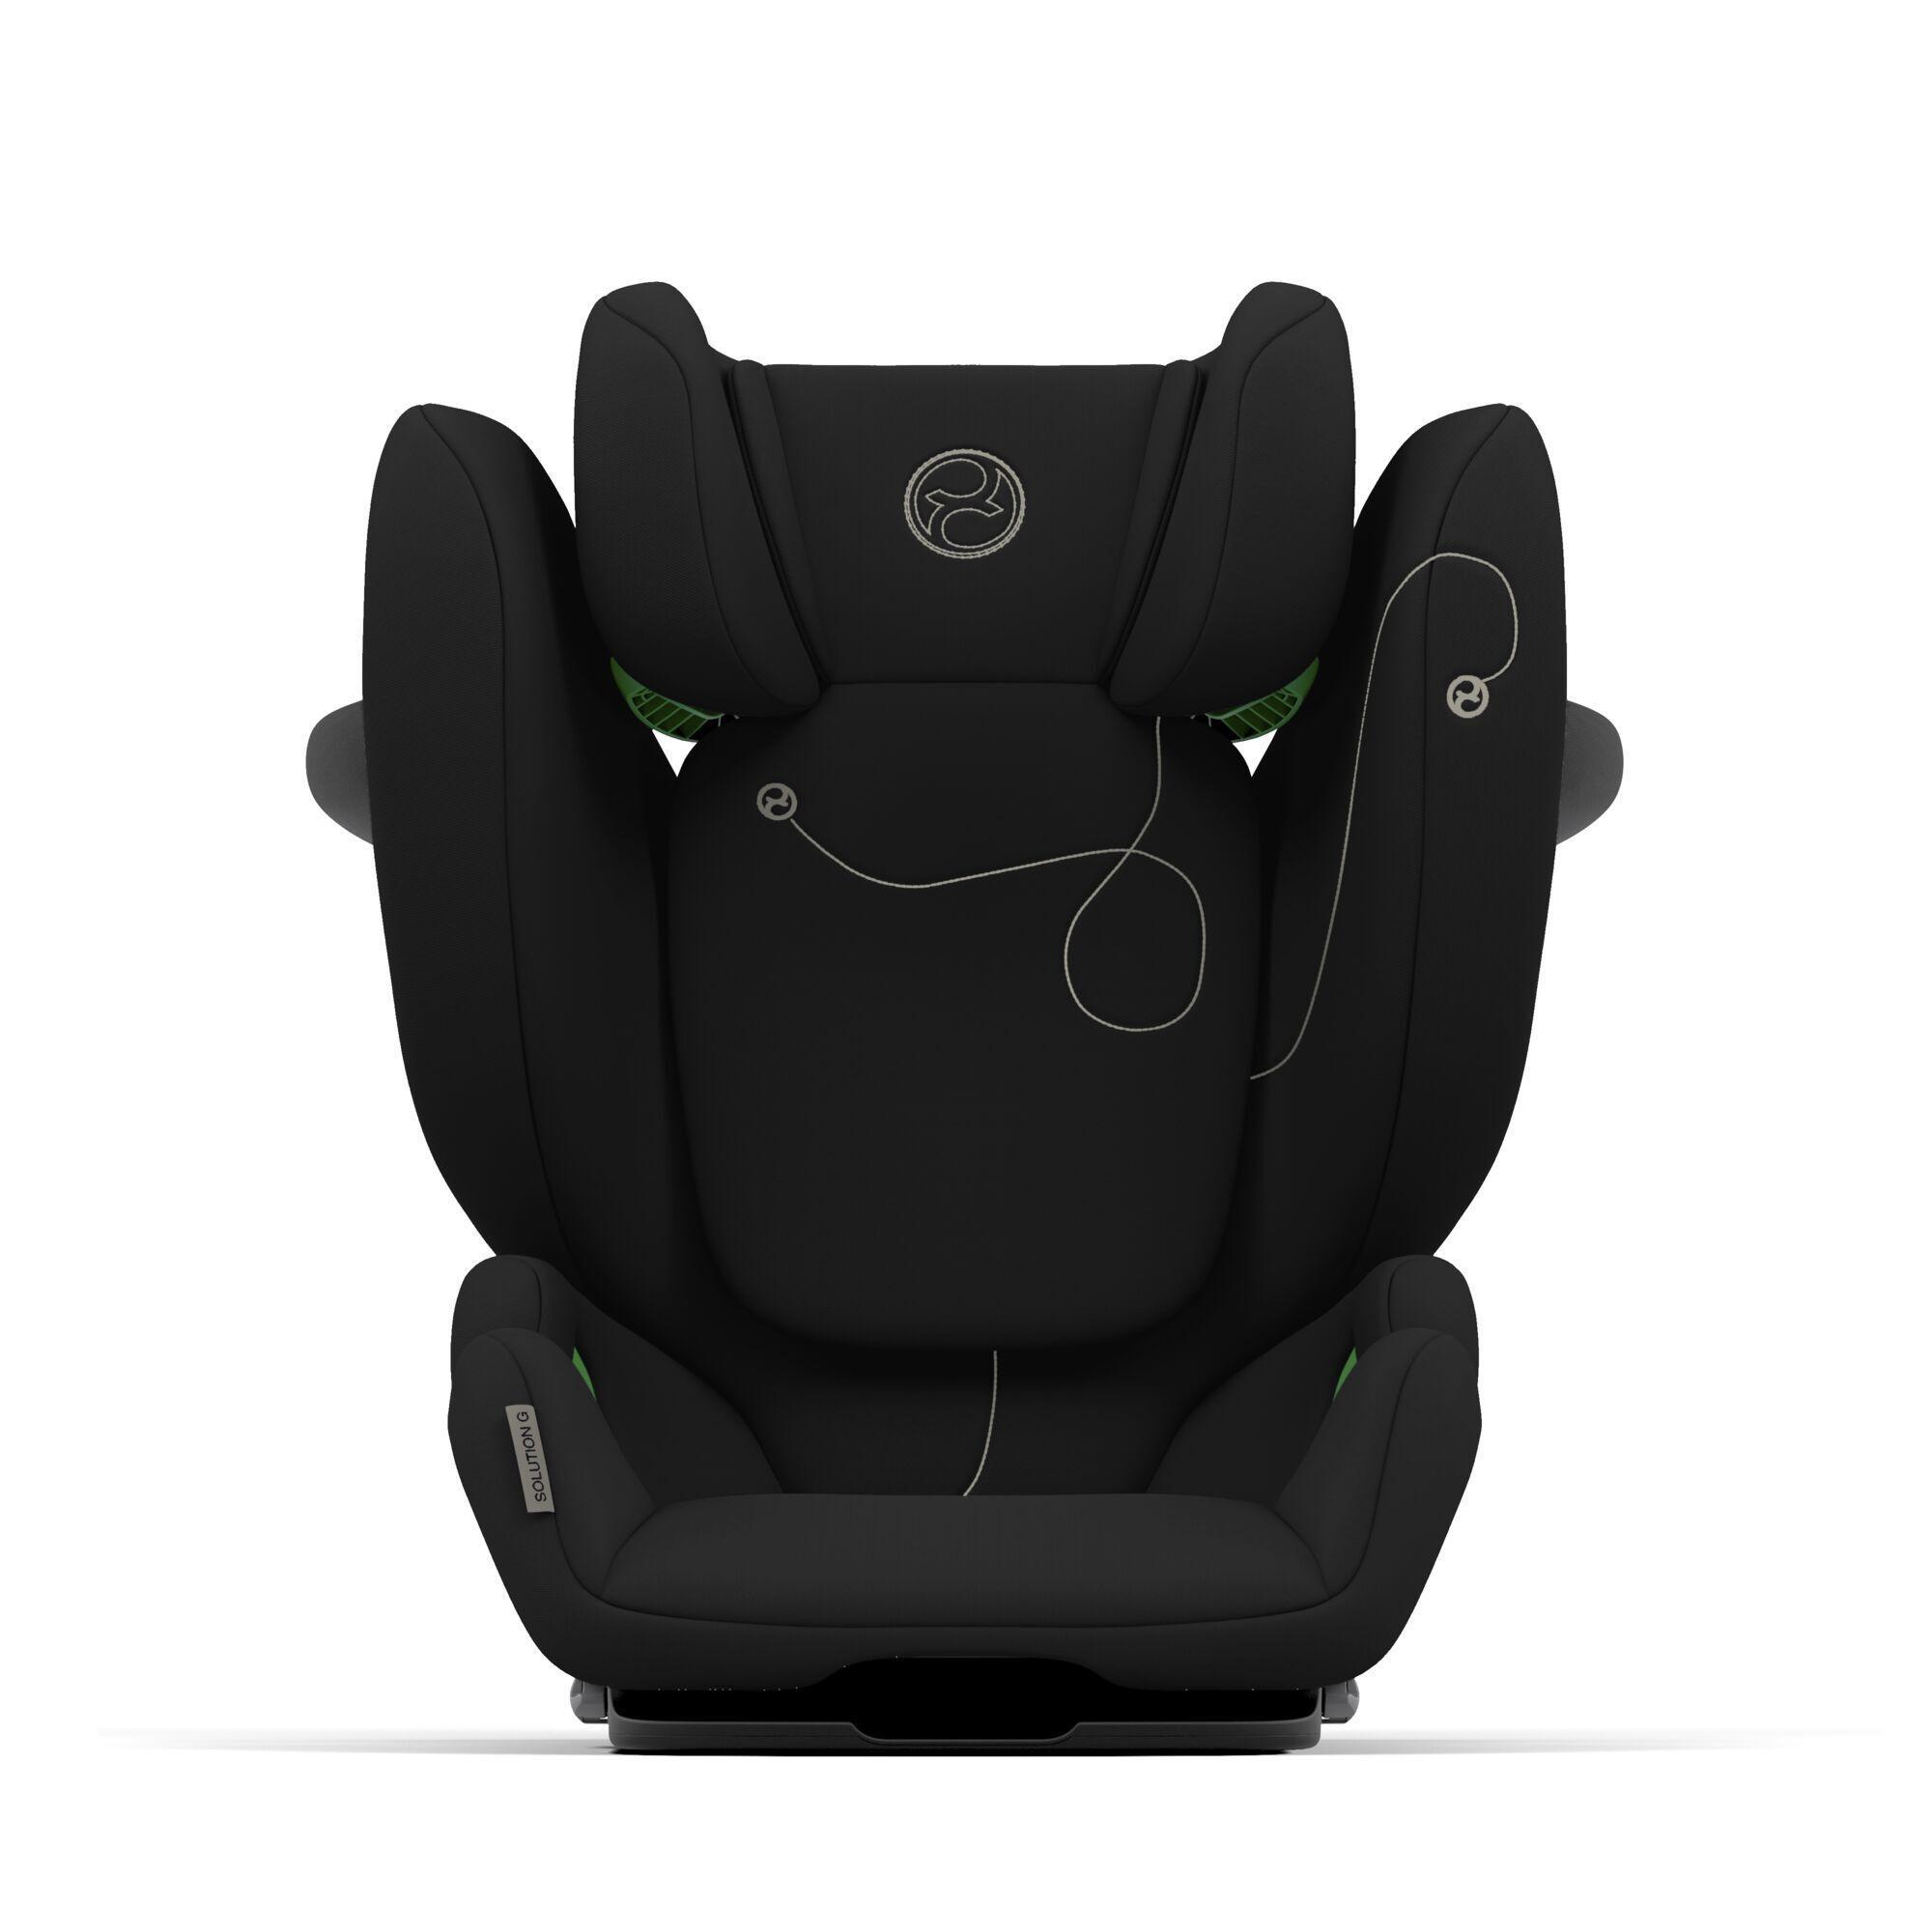 Order the Cybex Solution G i-Fix Car Seat online - Baby Plus